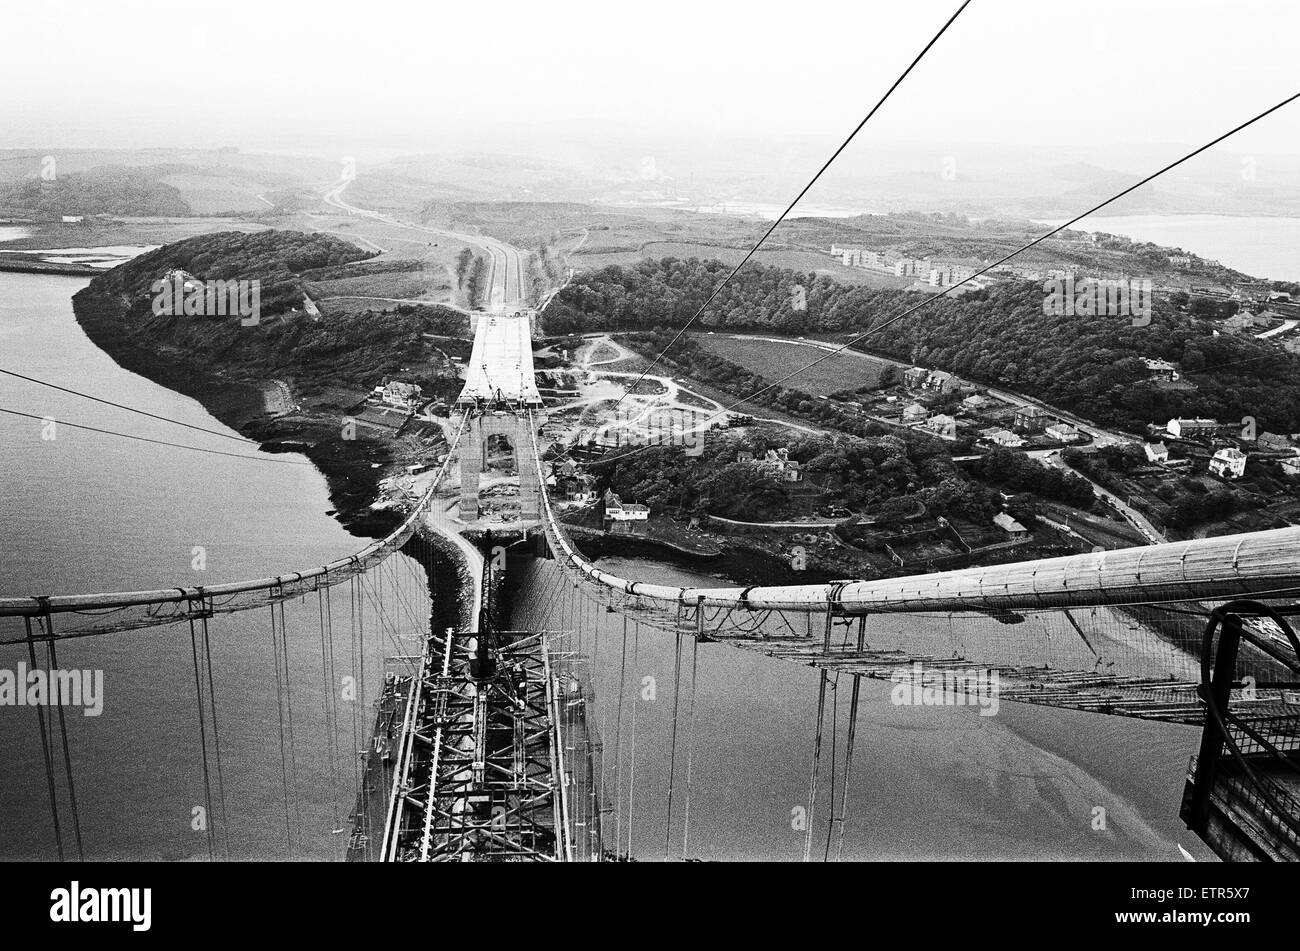 New Forth Road Bridge Under Construction. The Forth Road Bridge is a suspension bridge in east central Scotland. The bridge, opened in 1964, spans the Firth of Forth, connecting West Lothian, at South Queensferry, to Fife, at North Queensferry. 7th June 1 Stock Photo